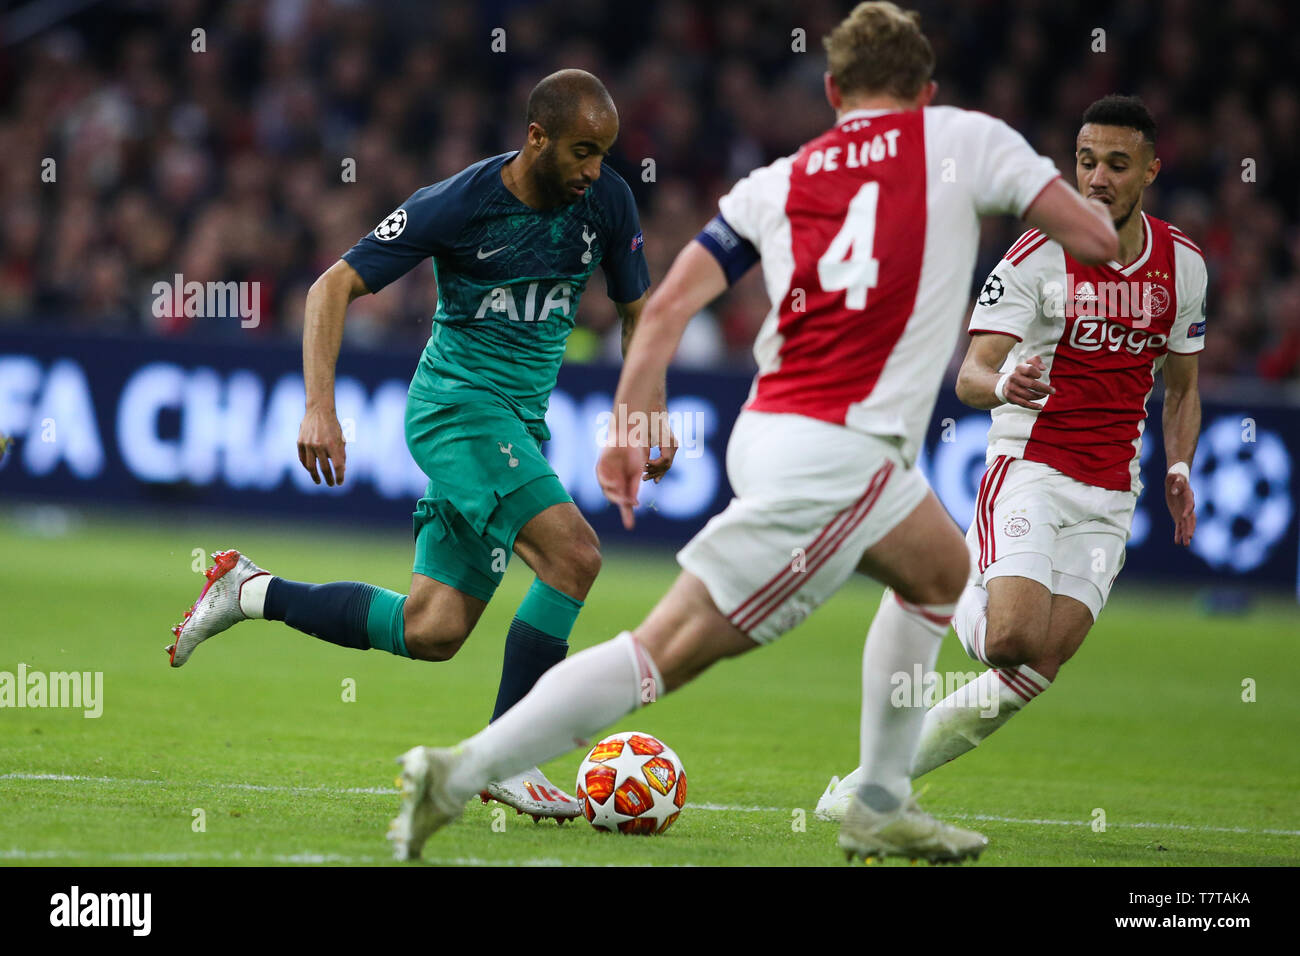 Lucas moura ajax tottenham hi-res stock photography and images - Alamy